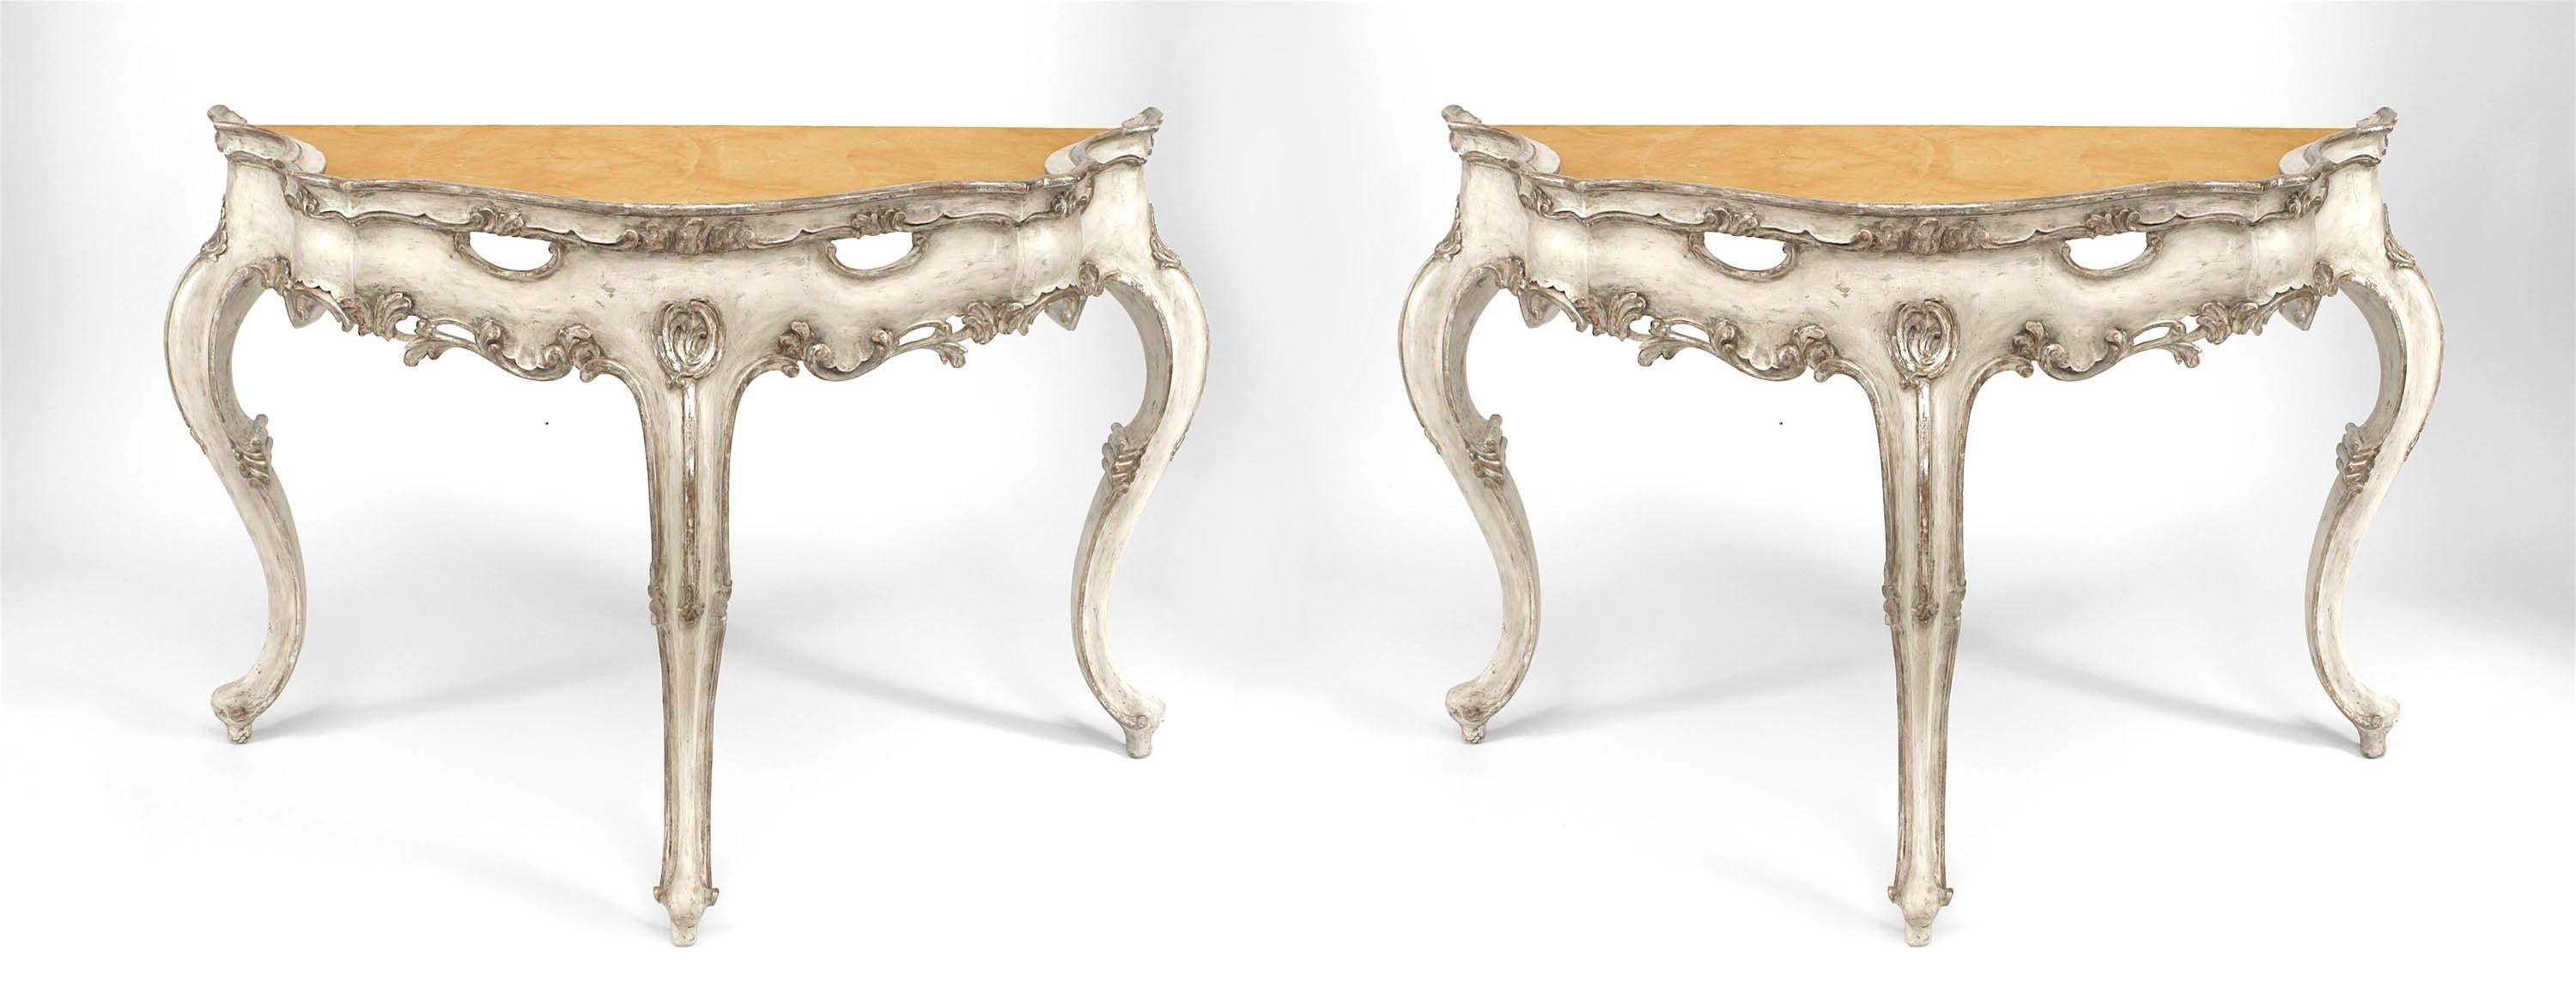 Pair of Italian Rococo-style (Venice, First Quarter 19th Century) silver gilt & white gesso painted console tables with inset shaped Siena marble top & scroll design apron on 3 cabriole legs (PRICED AS Pair)
